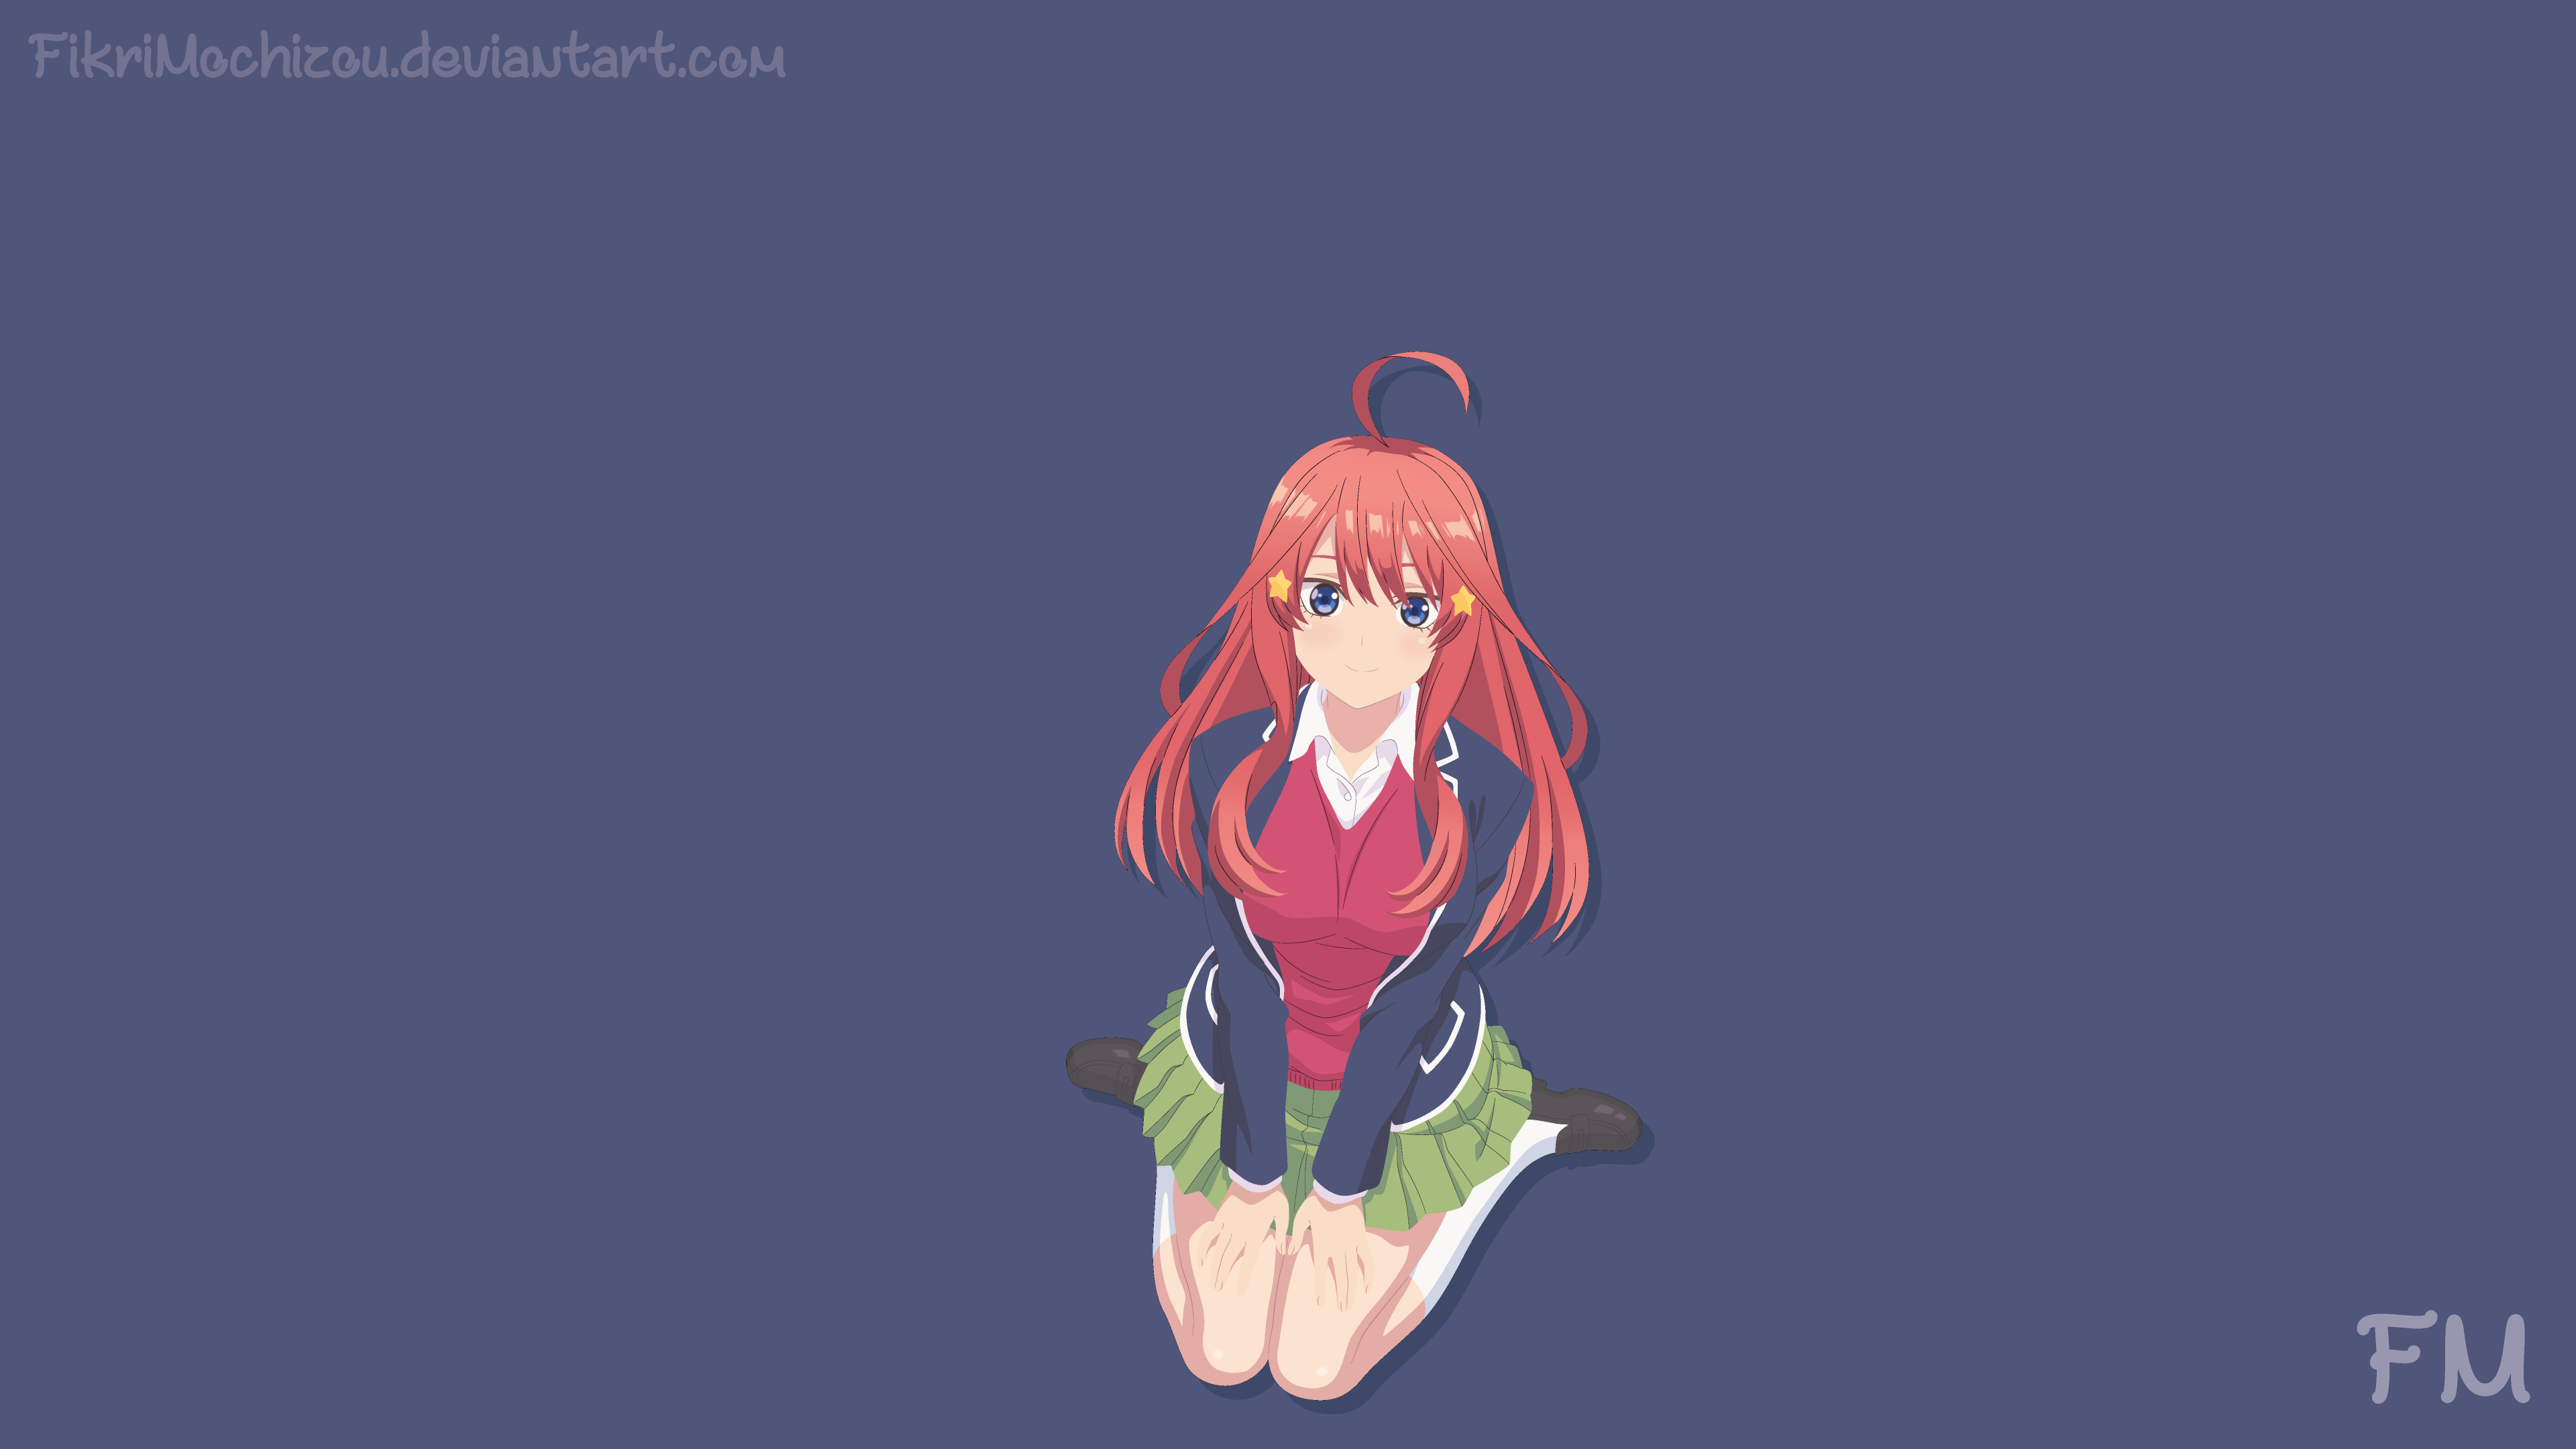 Wallpaper ID 358686  Anime The Quintessential Quintuplets Phone Wallpaper  Itsuki Nakano 1080x2340 free download